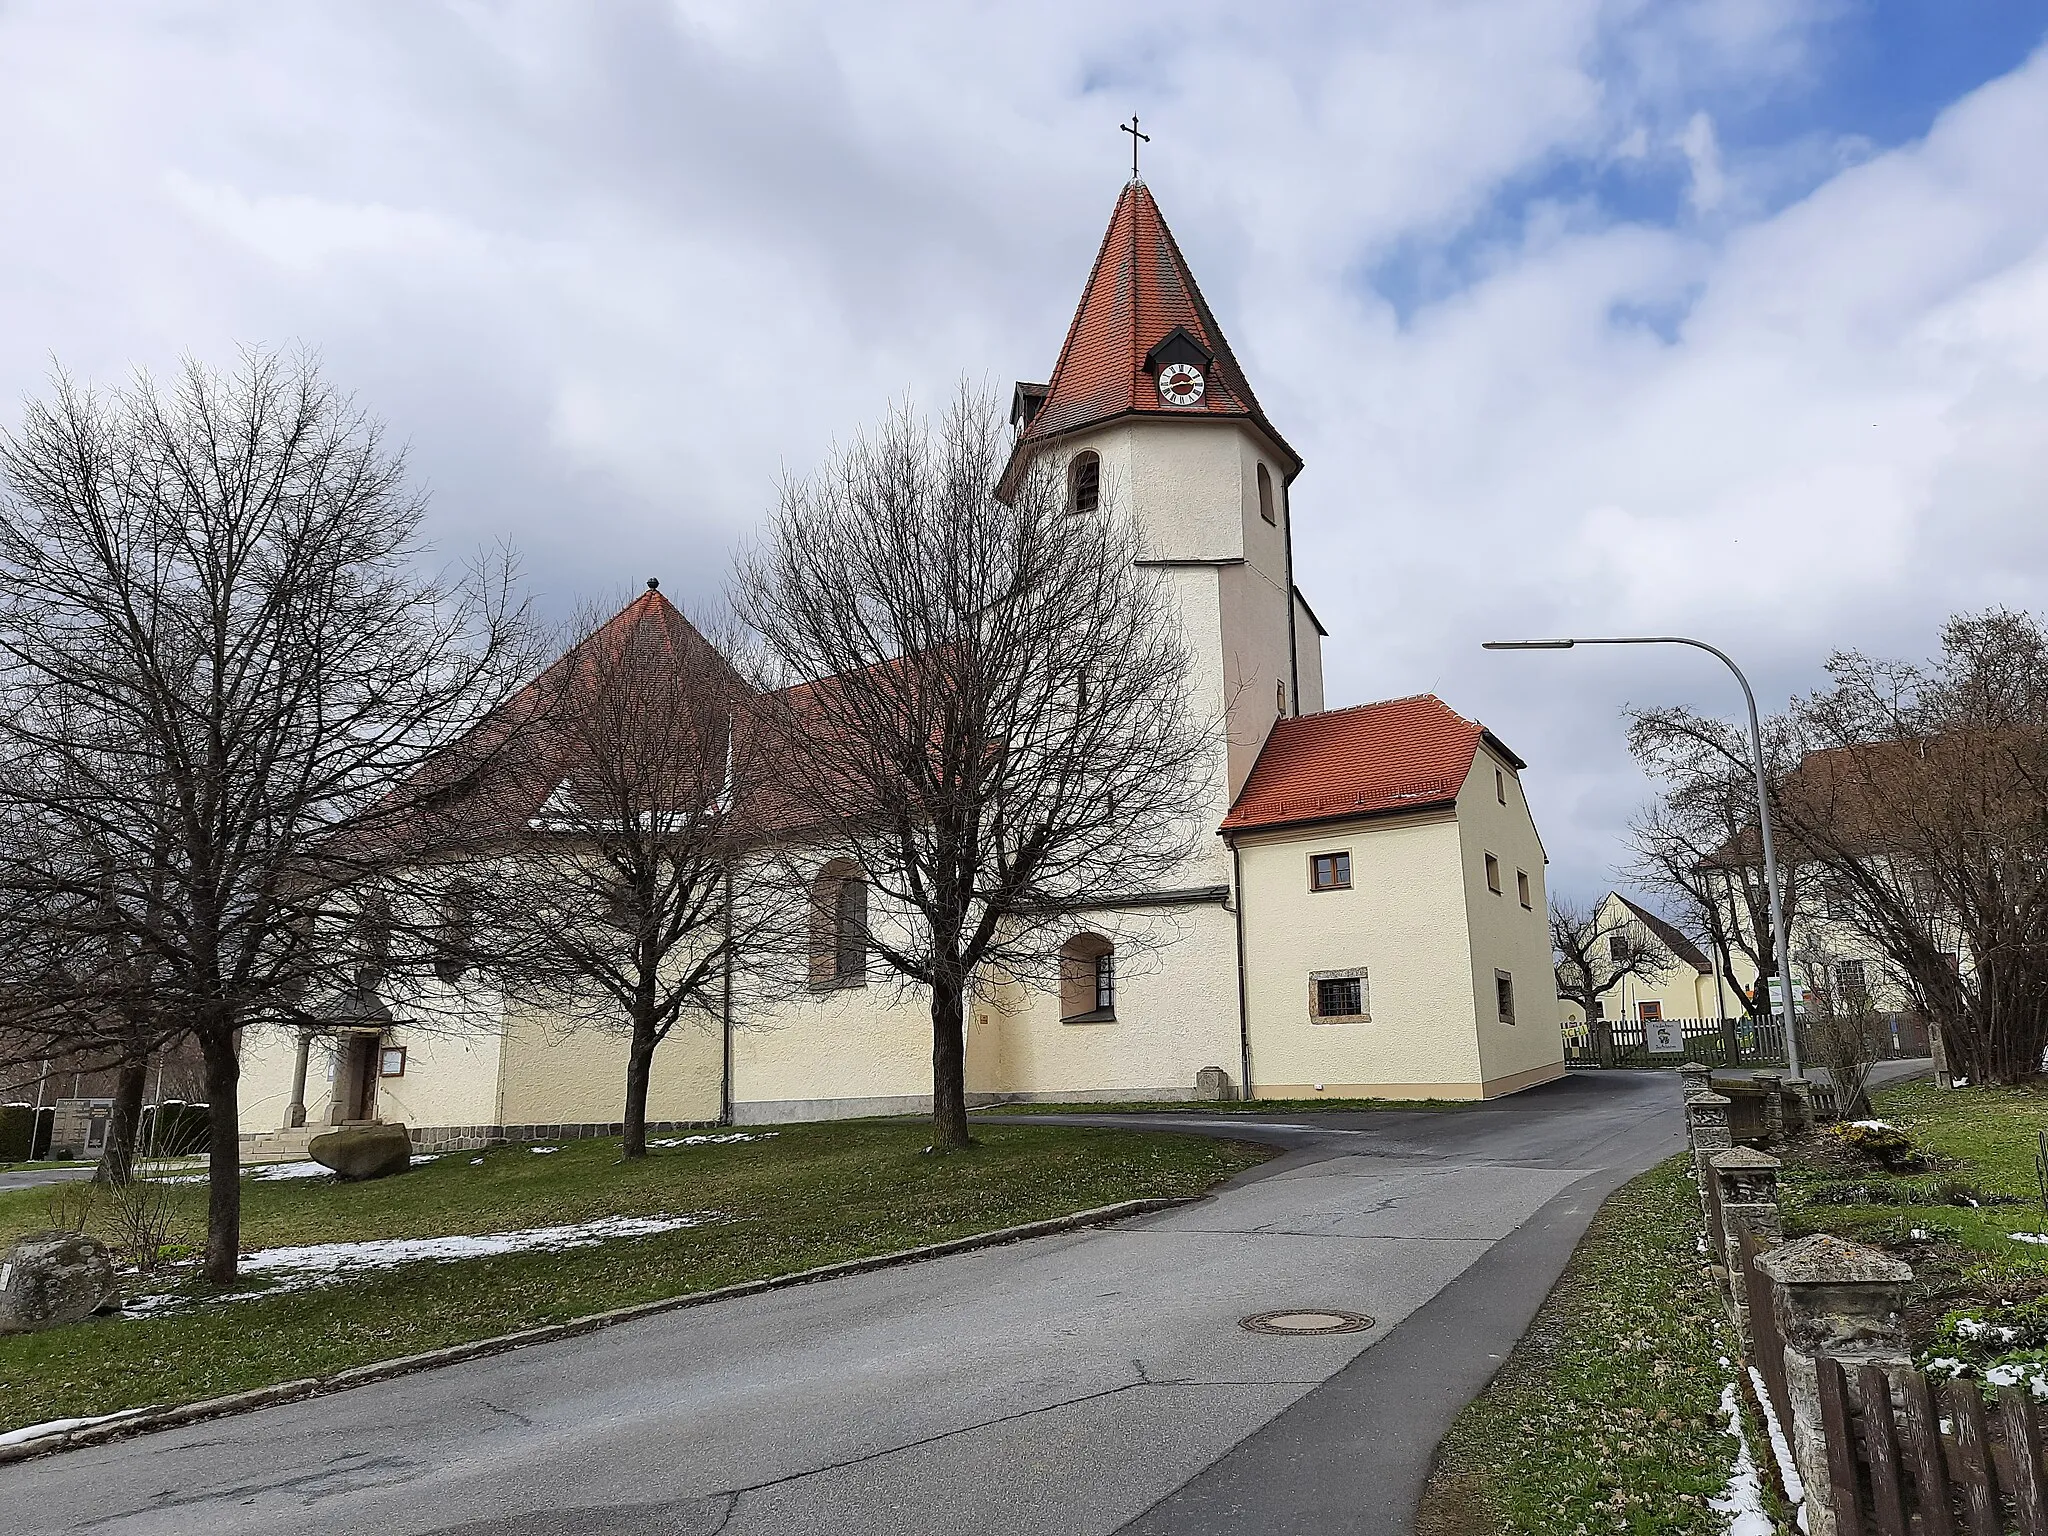 Photo showing: The Church "Katholische Pfarrkirche St. Johannes Baptist" with the Bell Tower in focus. The Church is located in Großkonreuth.